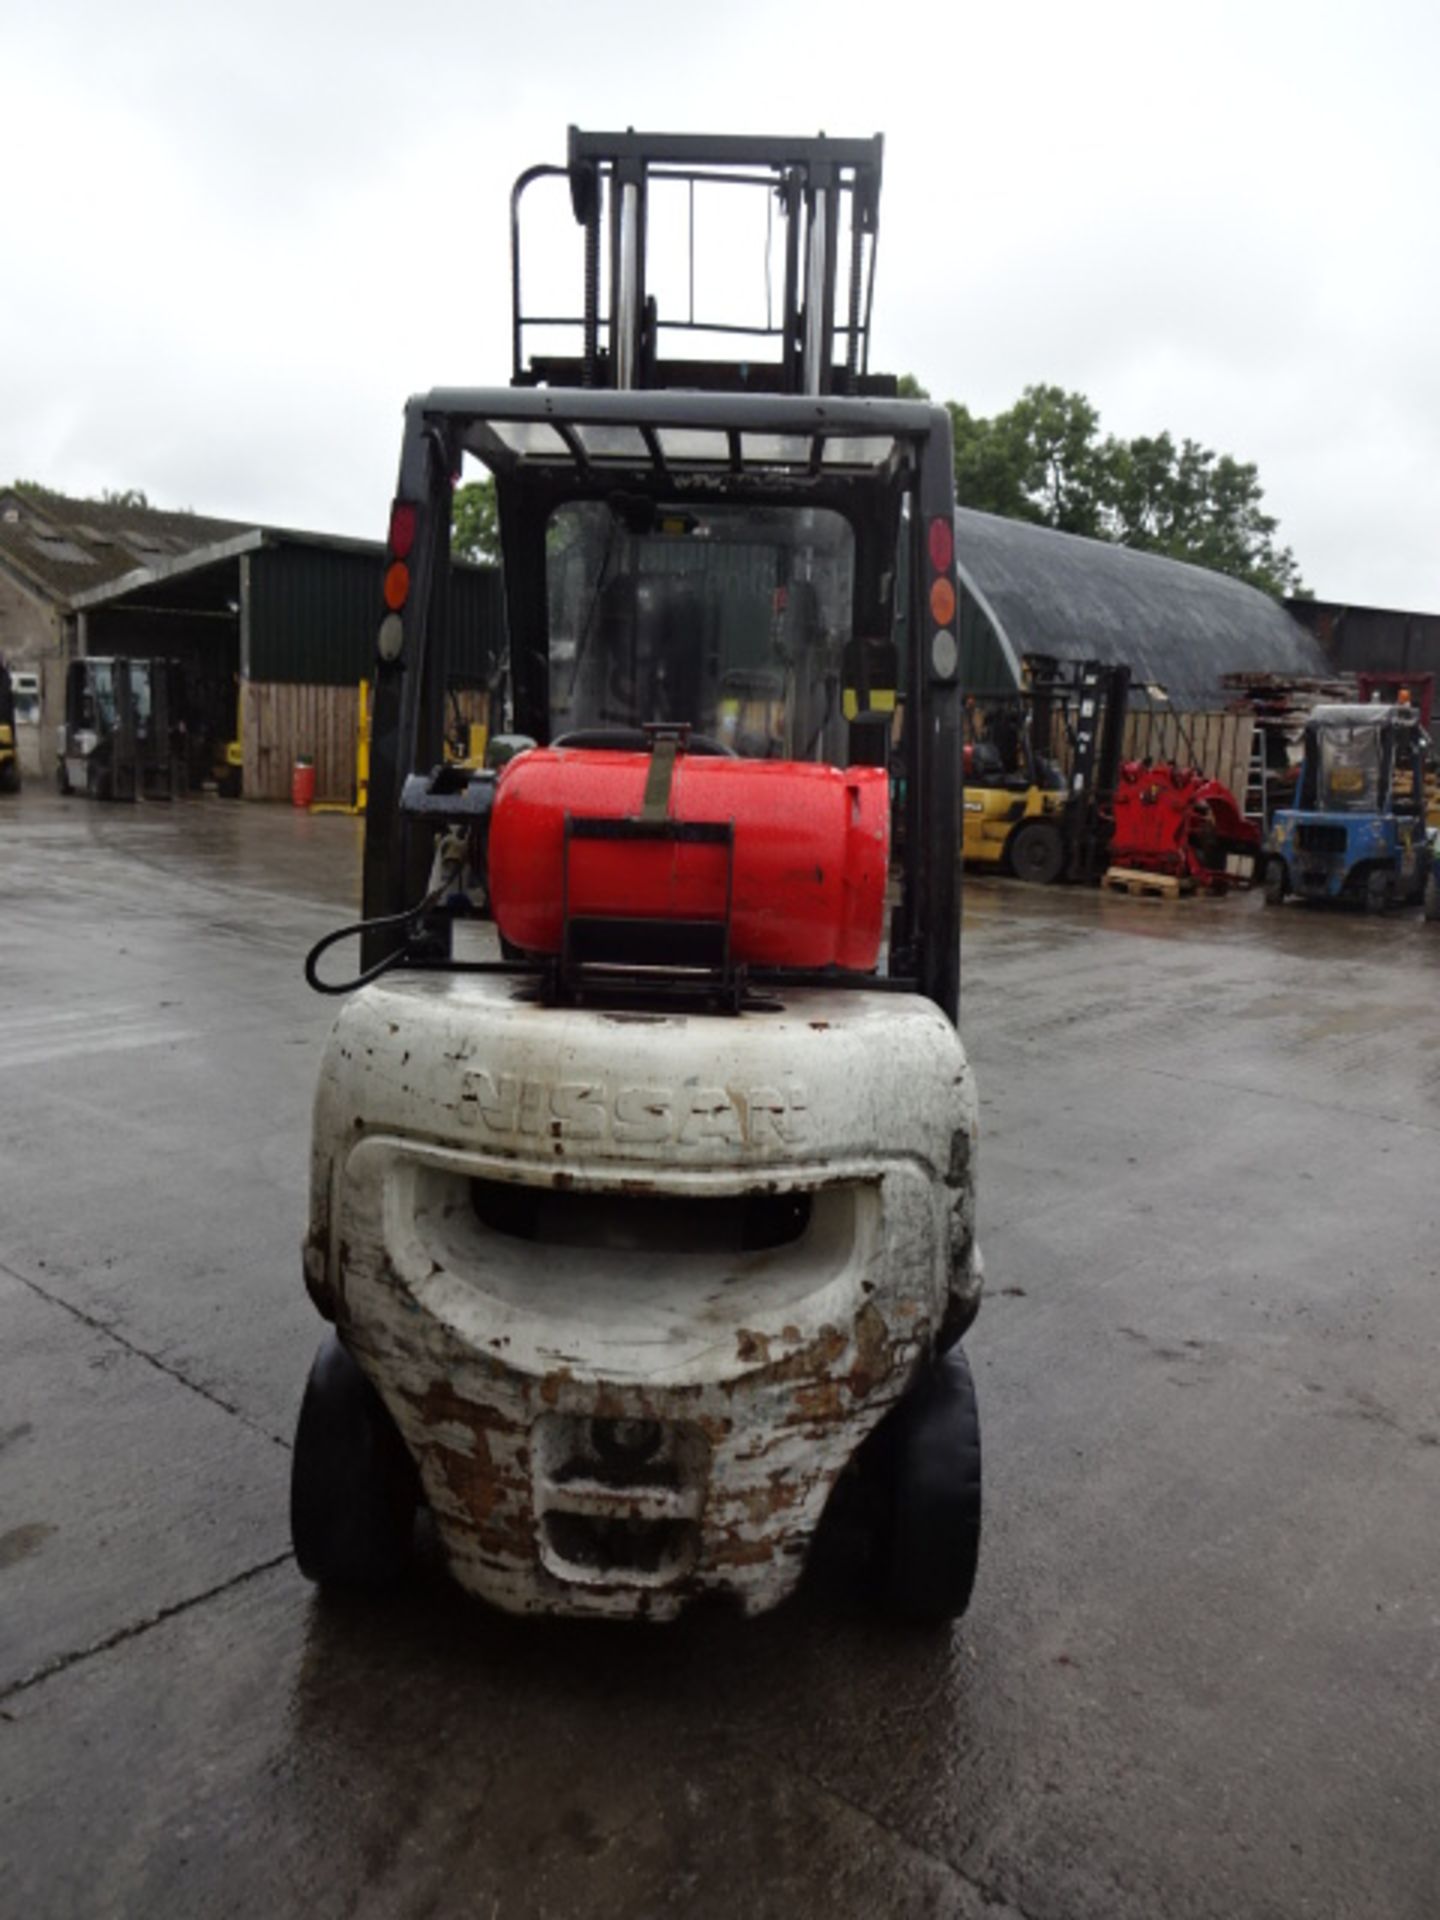 2006 NISSAN UDO2A20 2t gas driven forklift truck S/n: UDO2E705082 with duplex mast & side-shift ( - Image 8 of 8